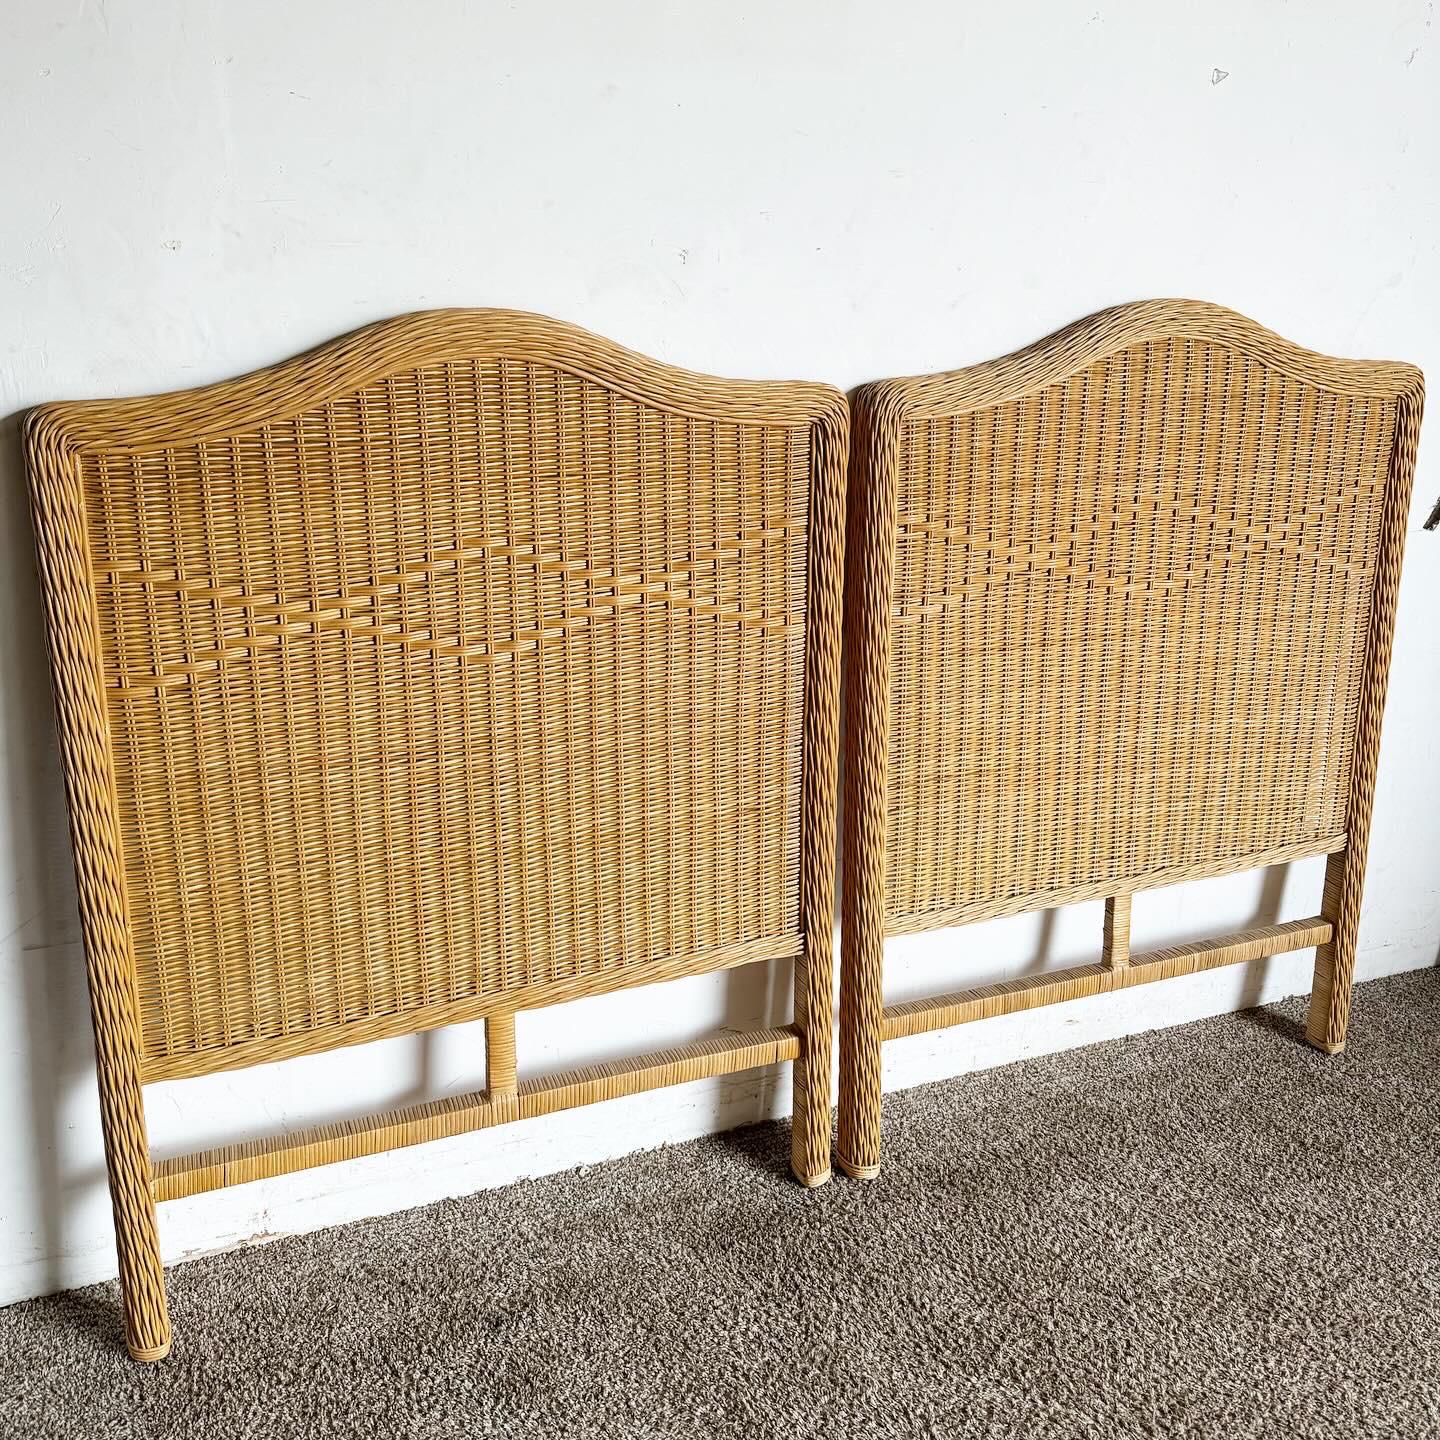 Chinese Boho Chic Wicker Rattan Twin Headboards - a Pair For Sale